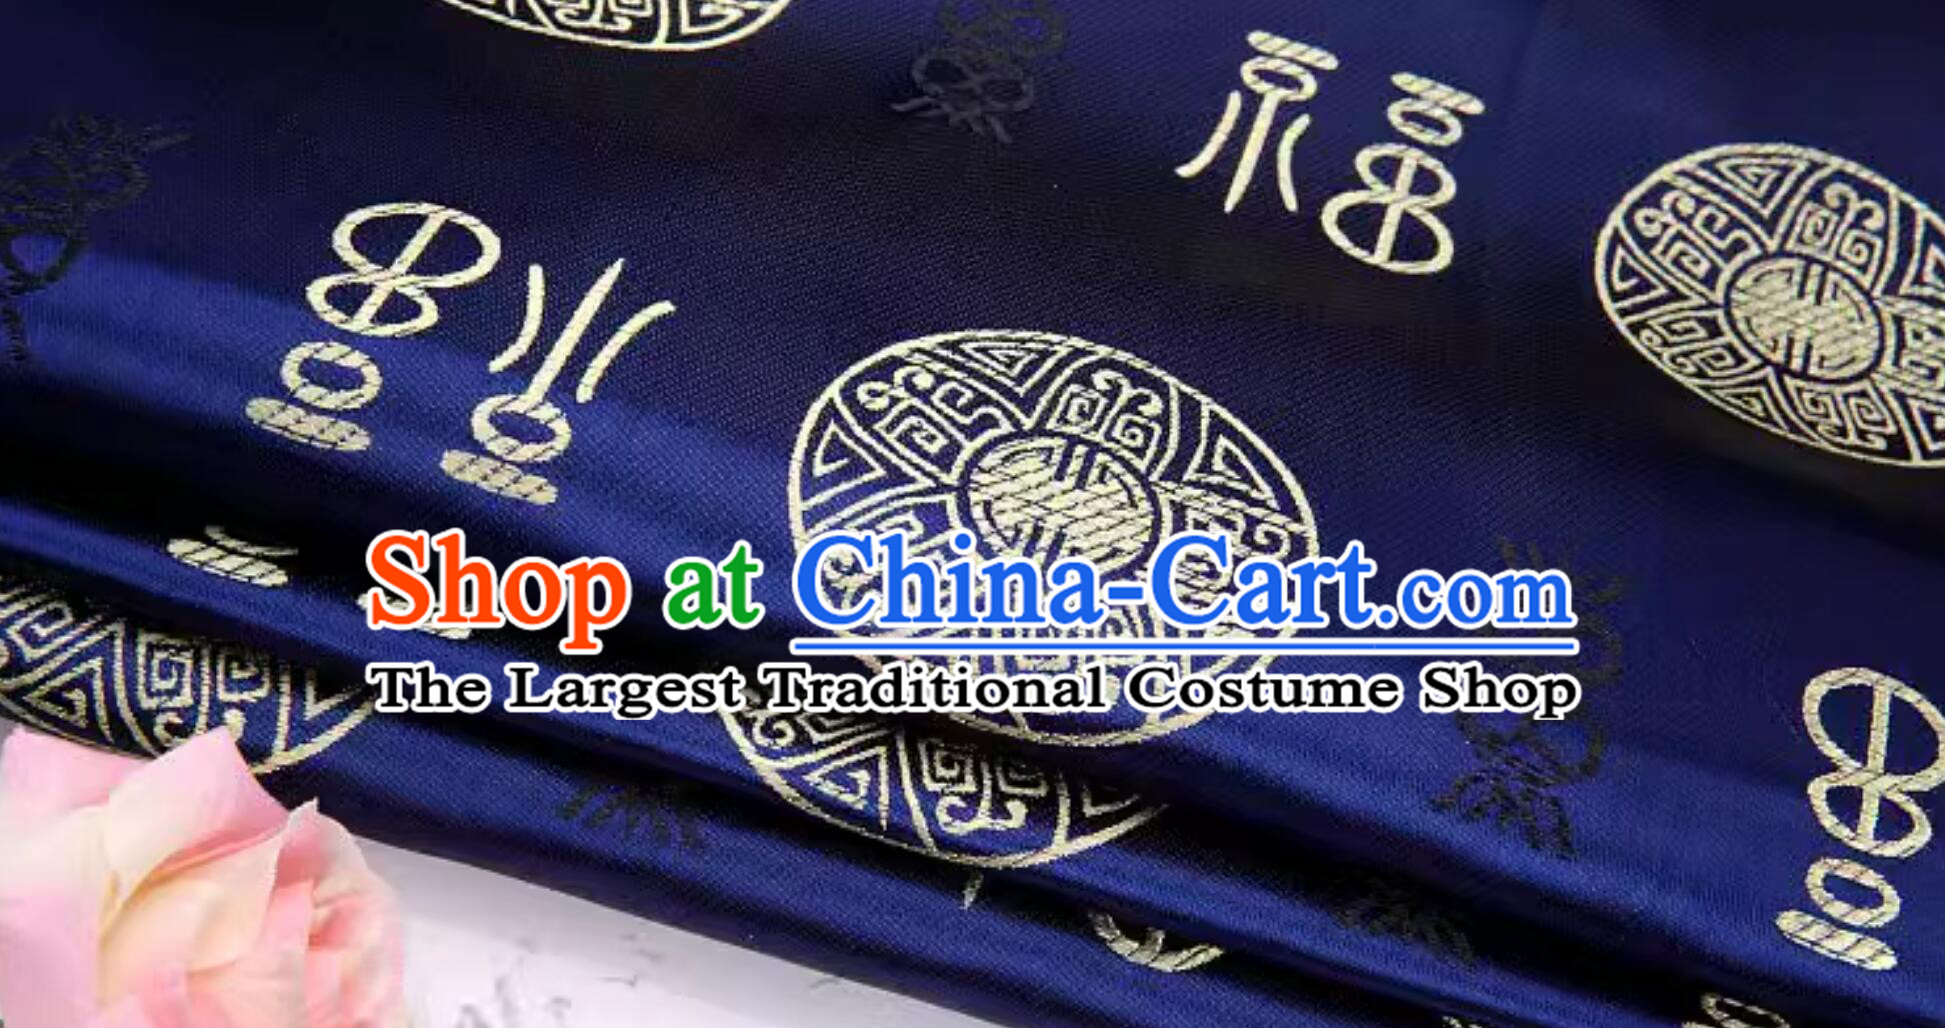 Oriental Material Chinese Royal Palace Style Traditional Lucky Pattern Design Dark Blue Brocade Fabric